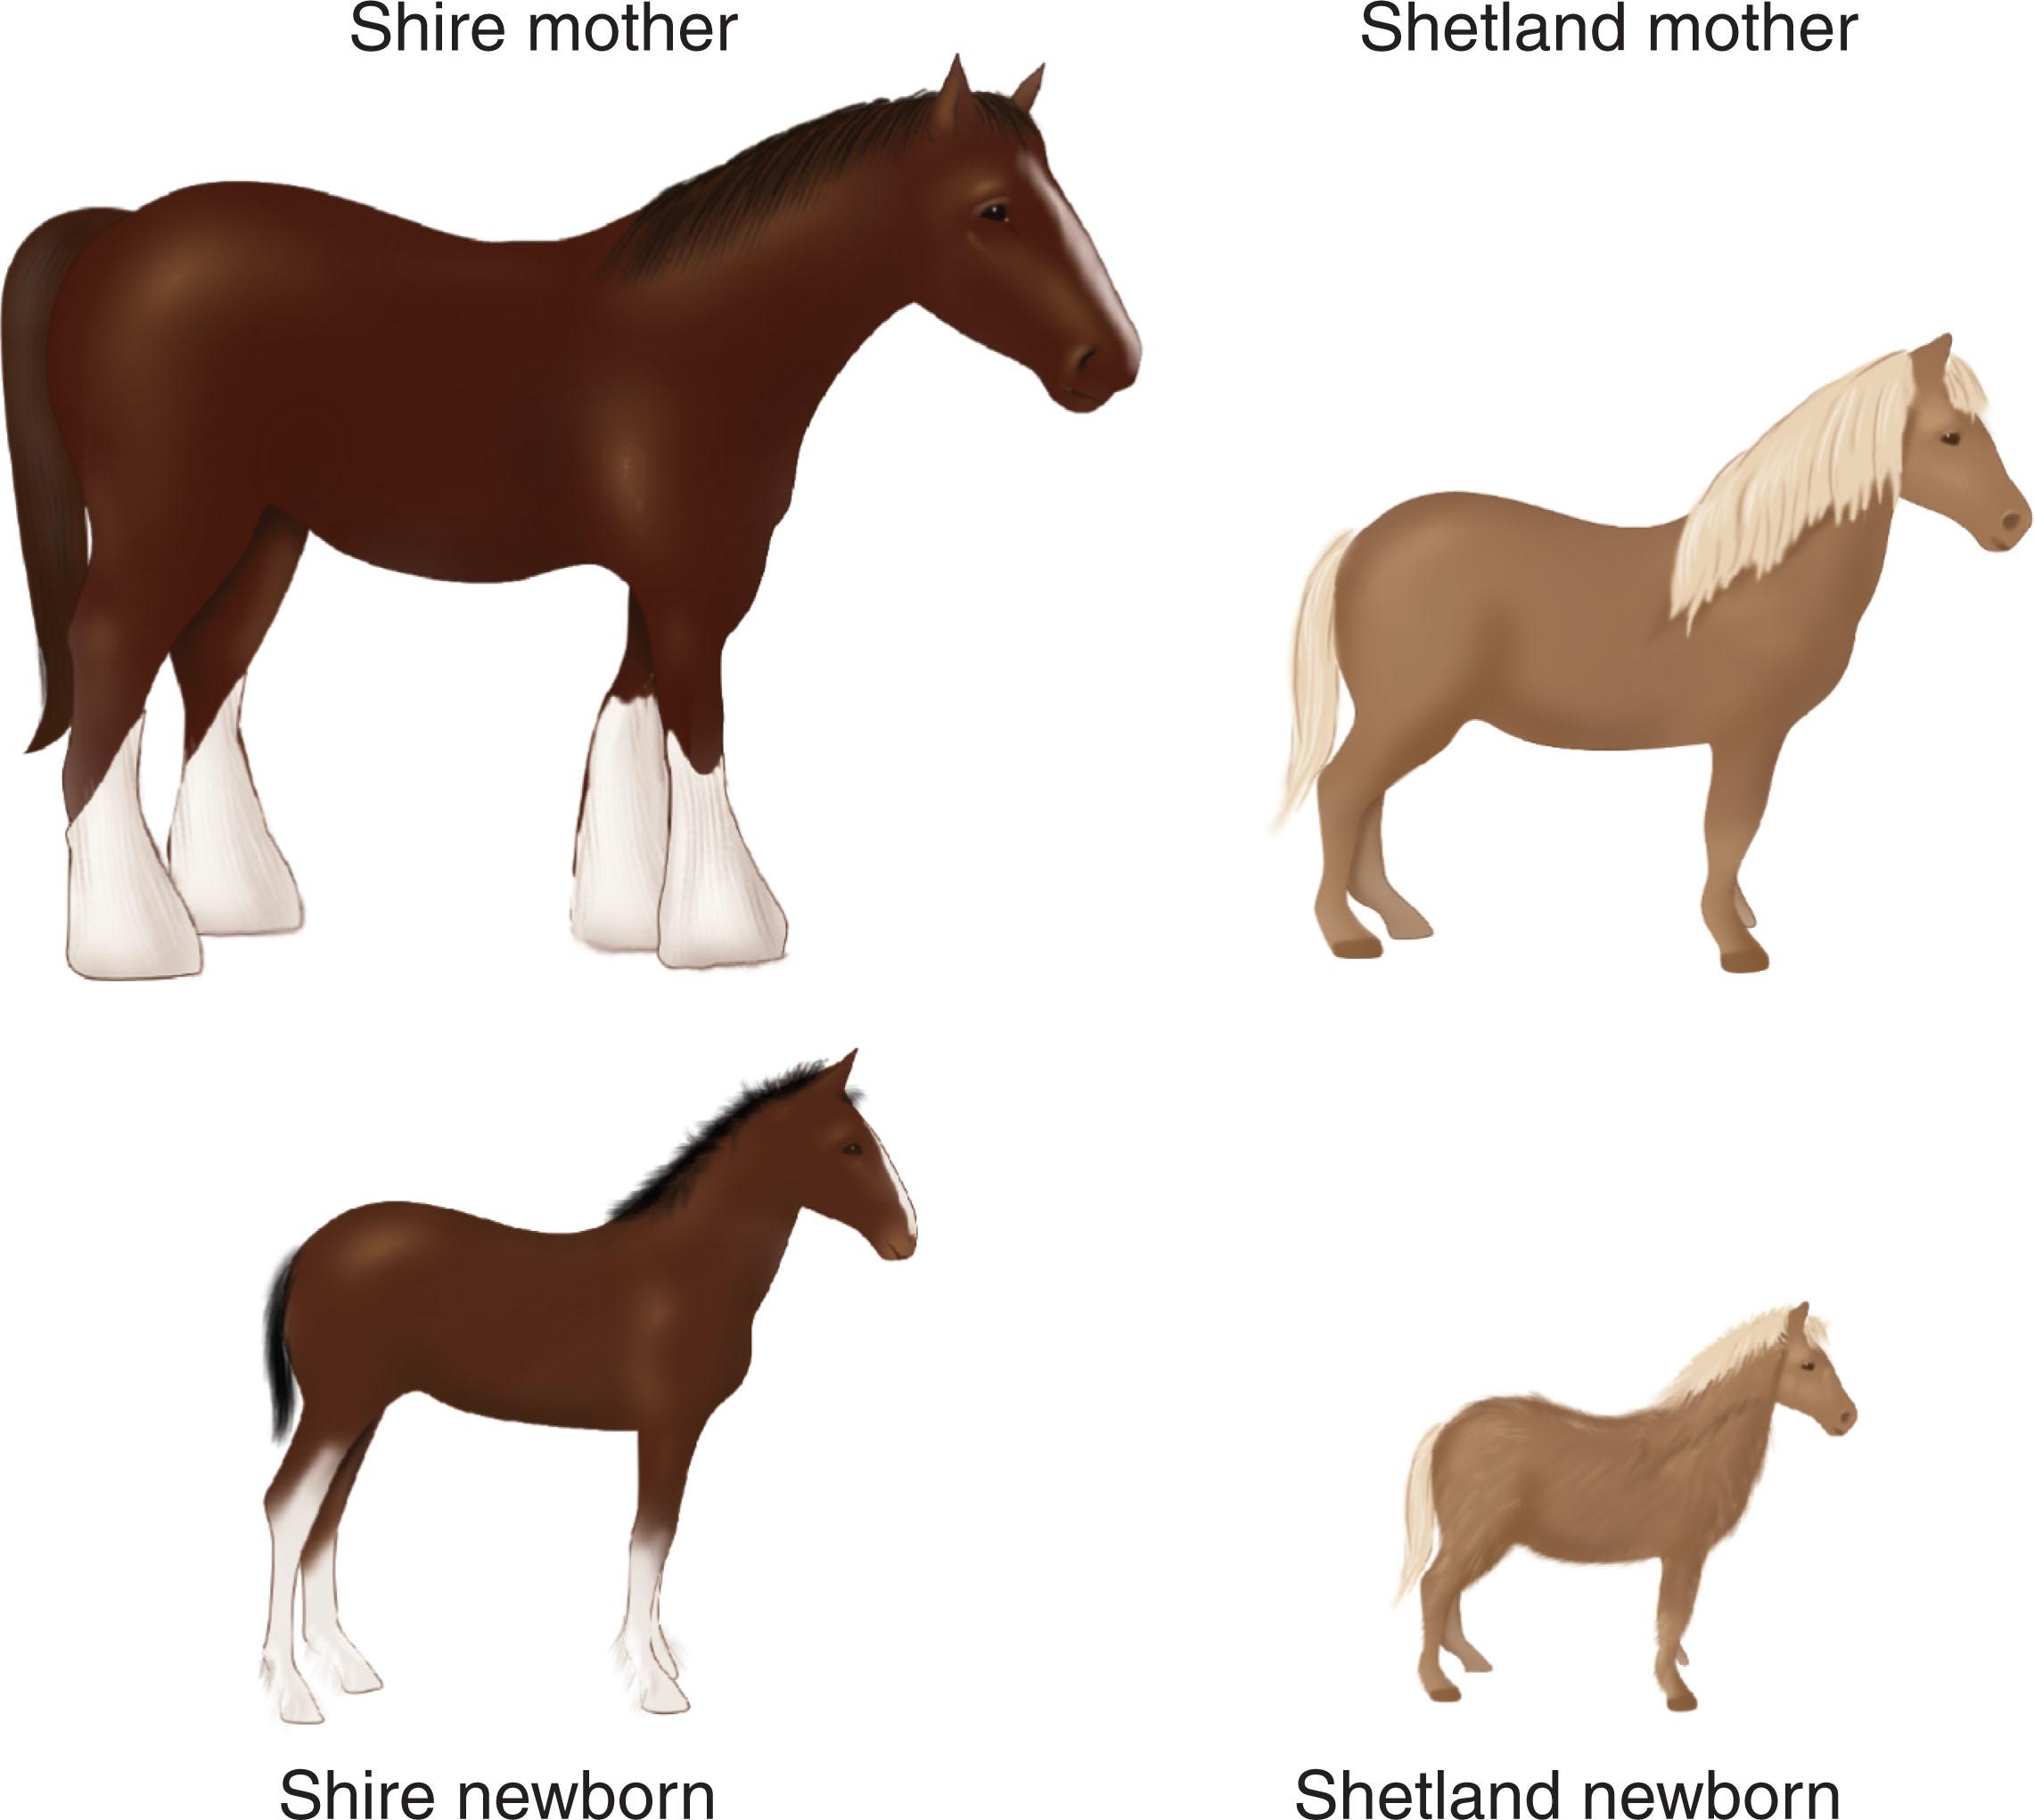 FIGURE 1.9, The cross between a shire horse and a Shetland pony dramatically illustrates the influence of maternal size on the size of the offspring at birth. Although the genetic situation is the same, the foal of the small mother is much smaller at birth than that of the large mother, presumably because of the smaller space within which to rear this fetus.